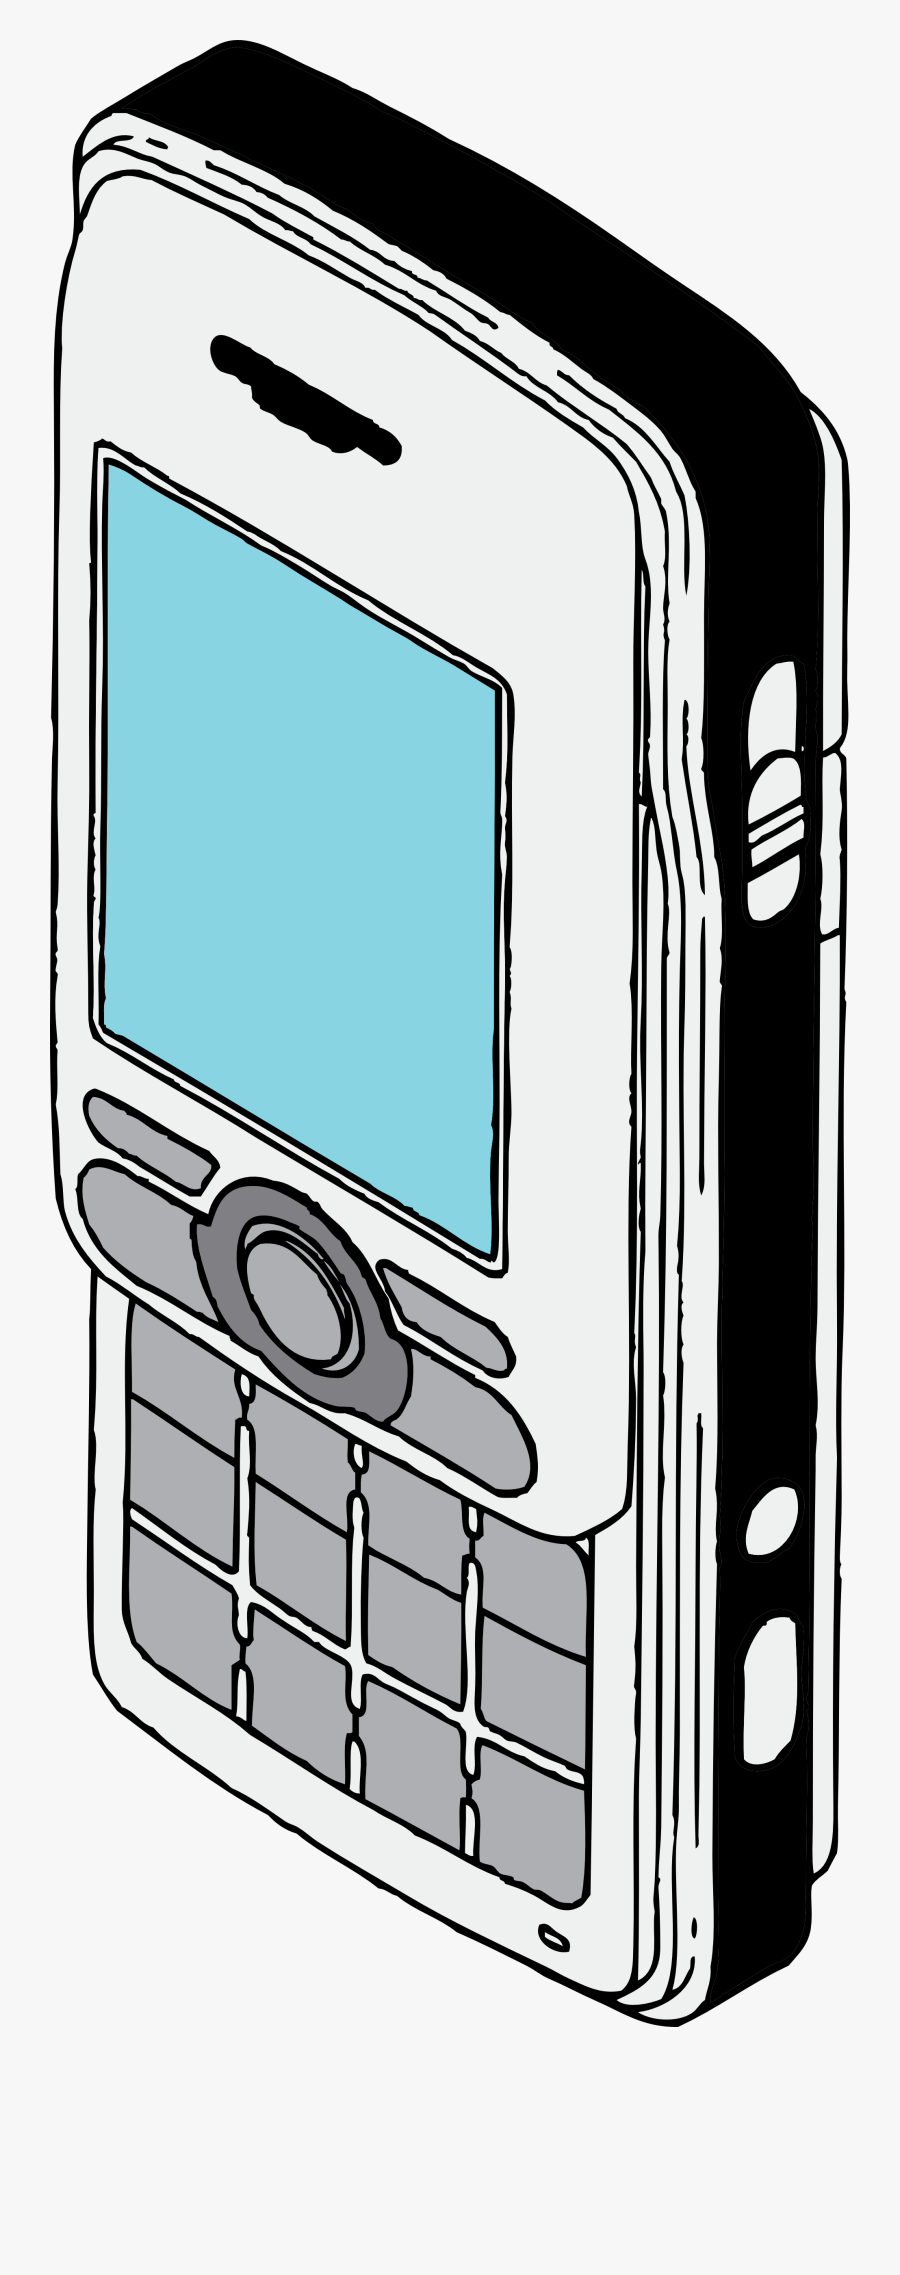 Cell Phone Clip Art Clipart - Mobile Phone Drawing, Transparent Clipart